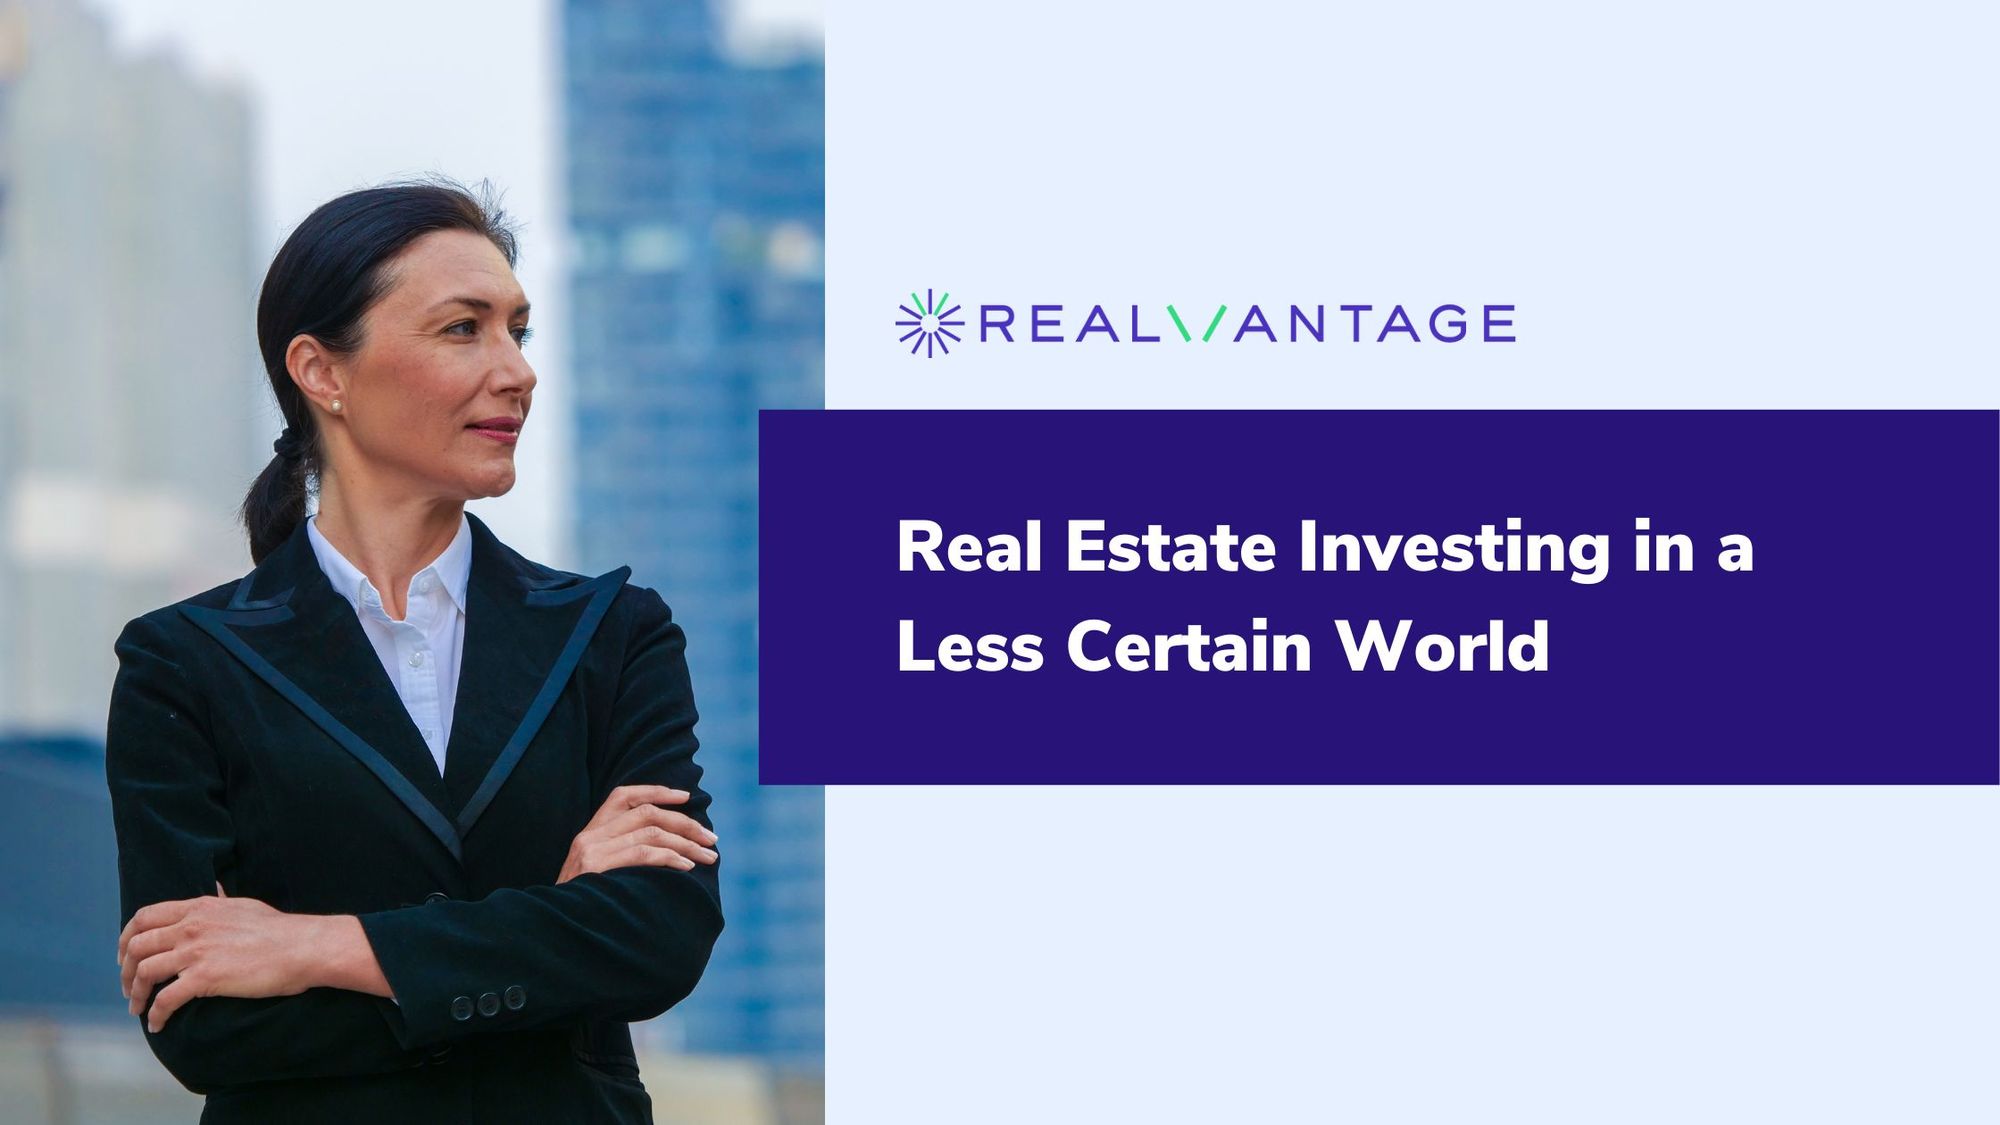 Real Estate Investing in a Less Certain World